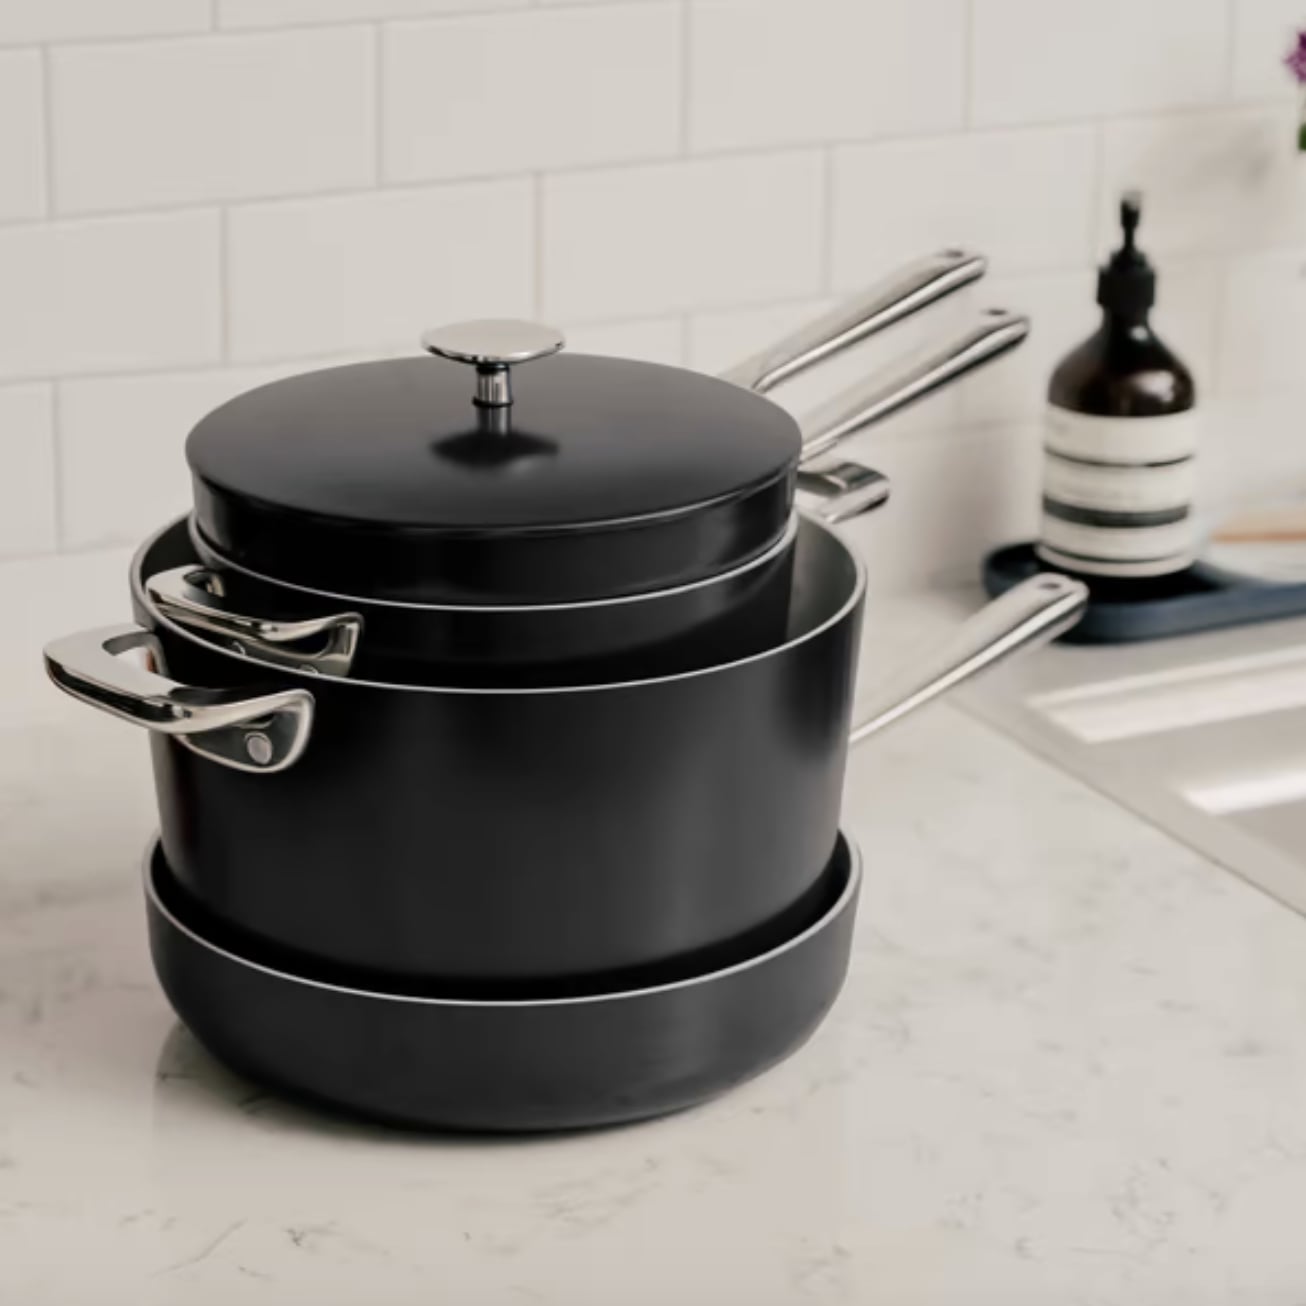 Why DTC cookware brands like Great Jones, Our Place, and East Fork